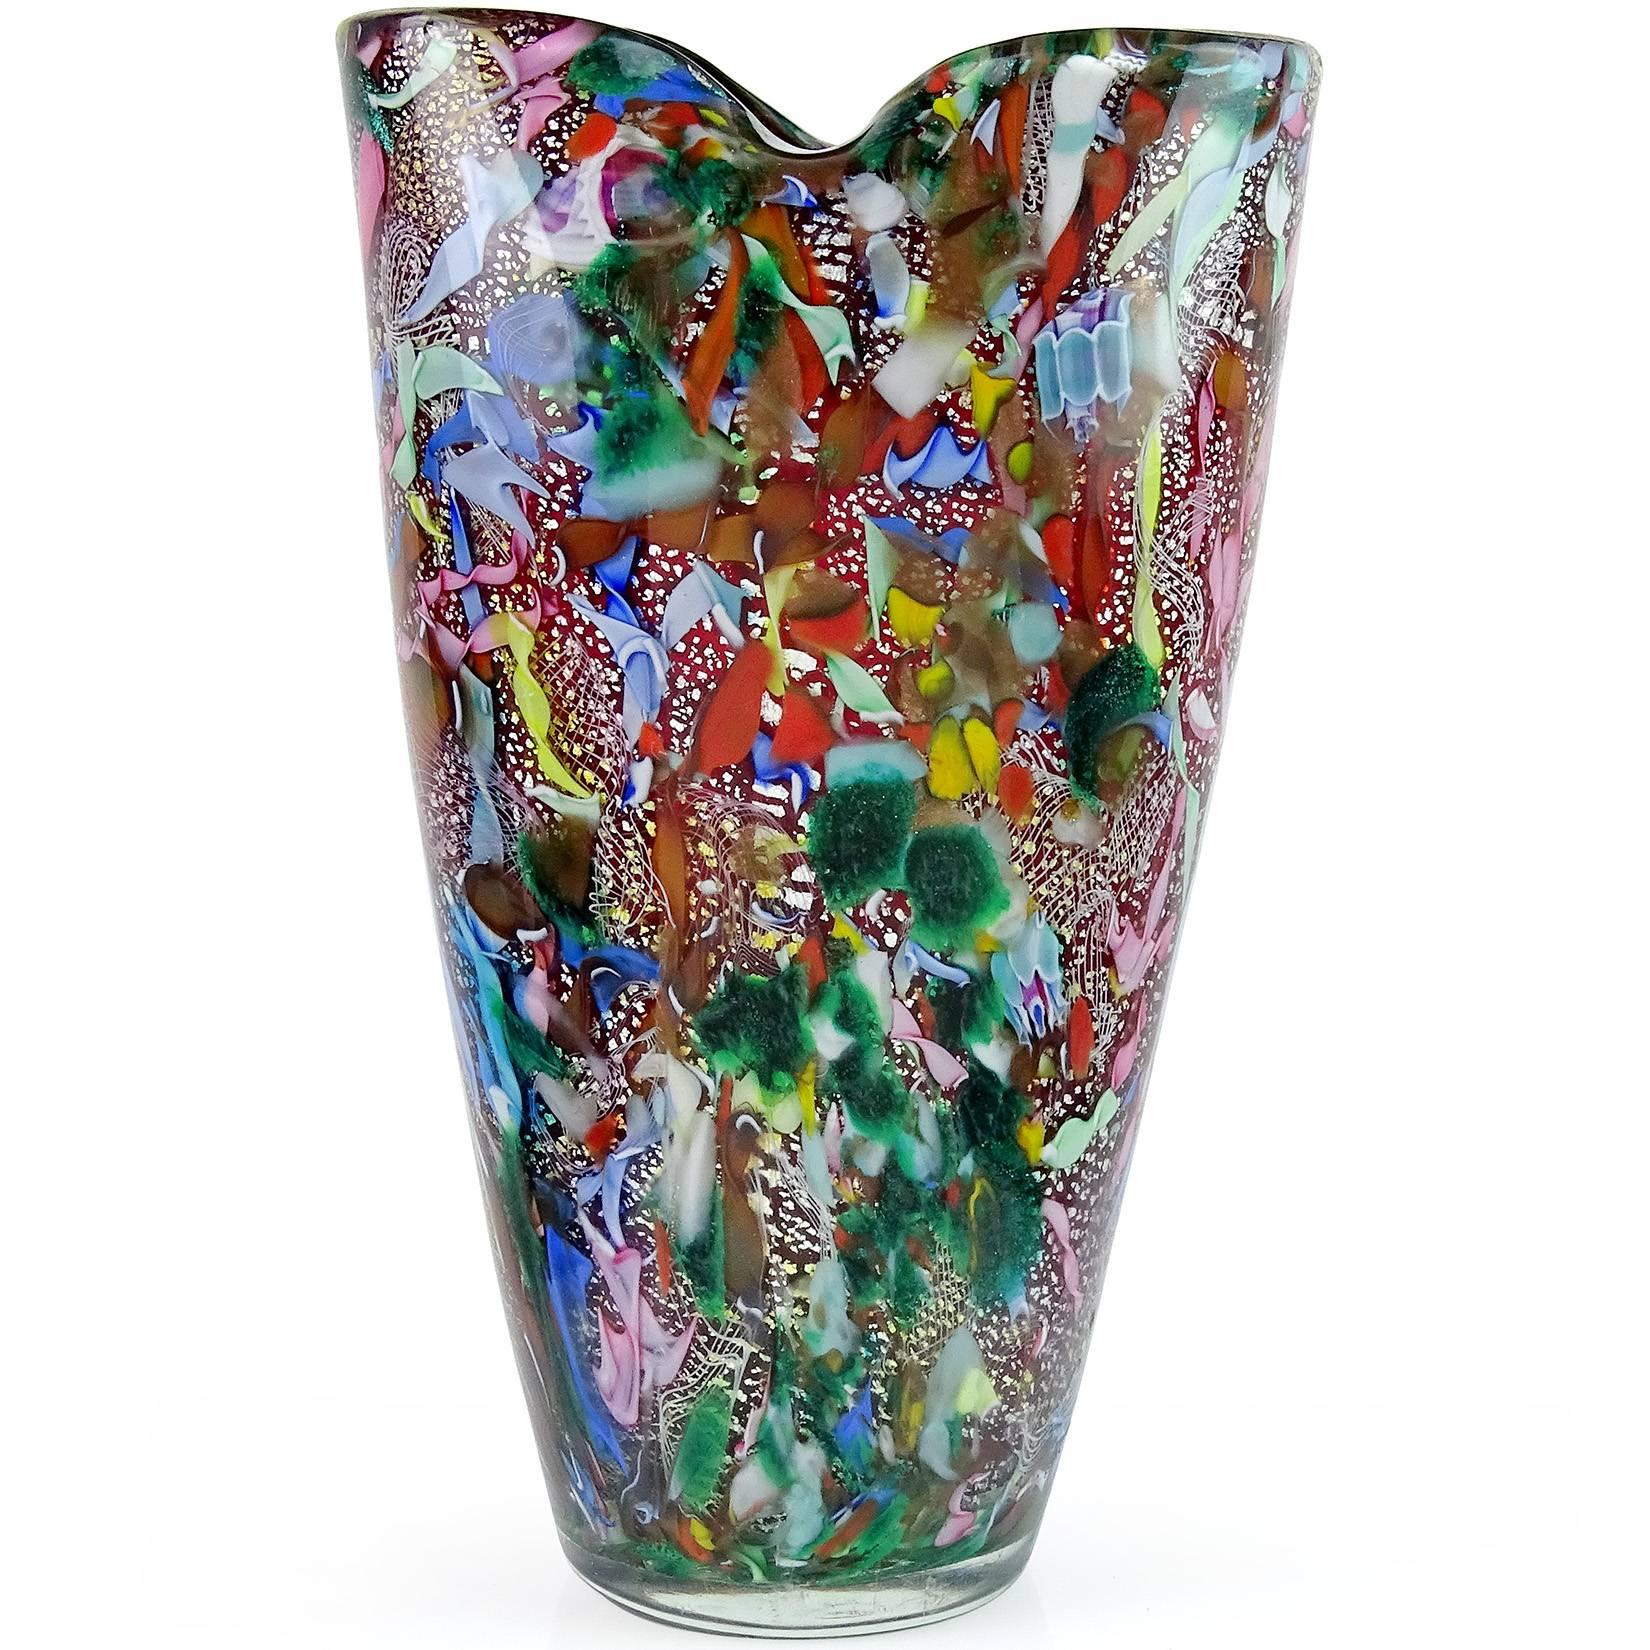 Beautiful vintage Murano hand blown red, silver flecks, green aventurine, millefiori murrines and twisted ribbons Italian art glass flower vase. Documented to the A.Ve.M. (Arte Vetraria Muranese) company. The piece has a pinched rim. Mid Century